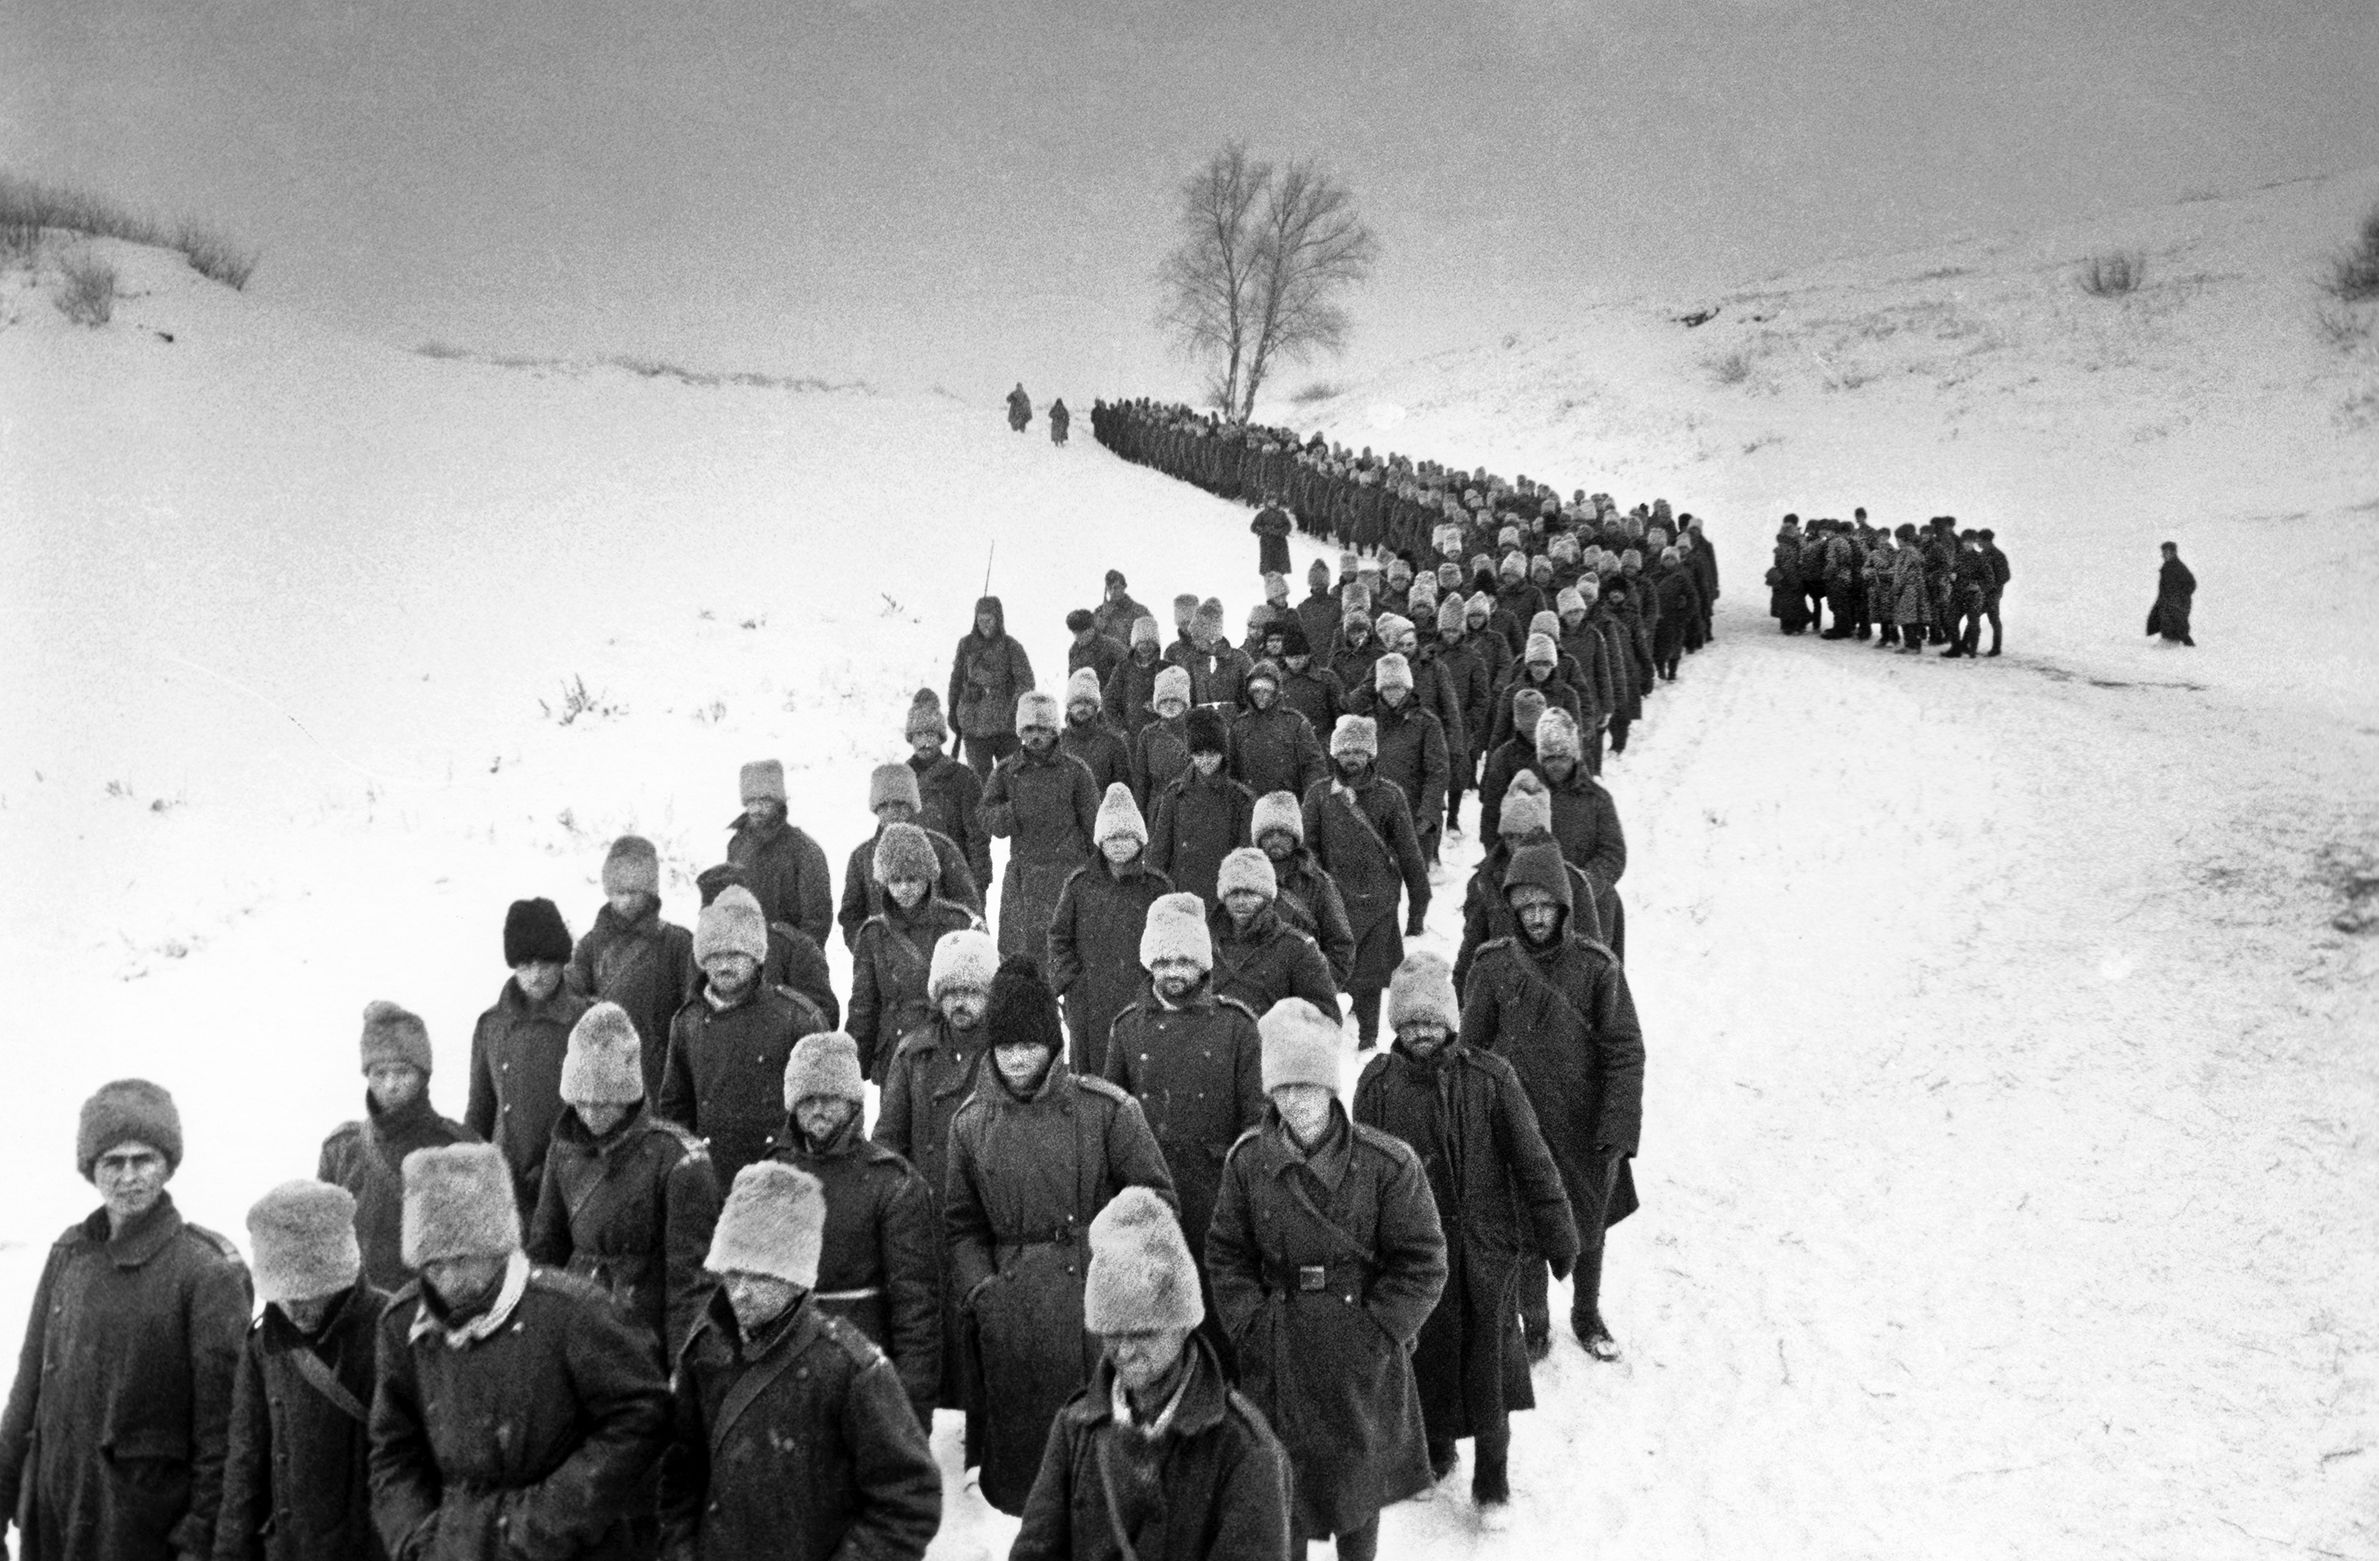 A long line of Romanian prisoners stretches across the windy countryside. These soldiers are on their way to a Soviet prison camp, from which many of them will probably never return.